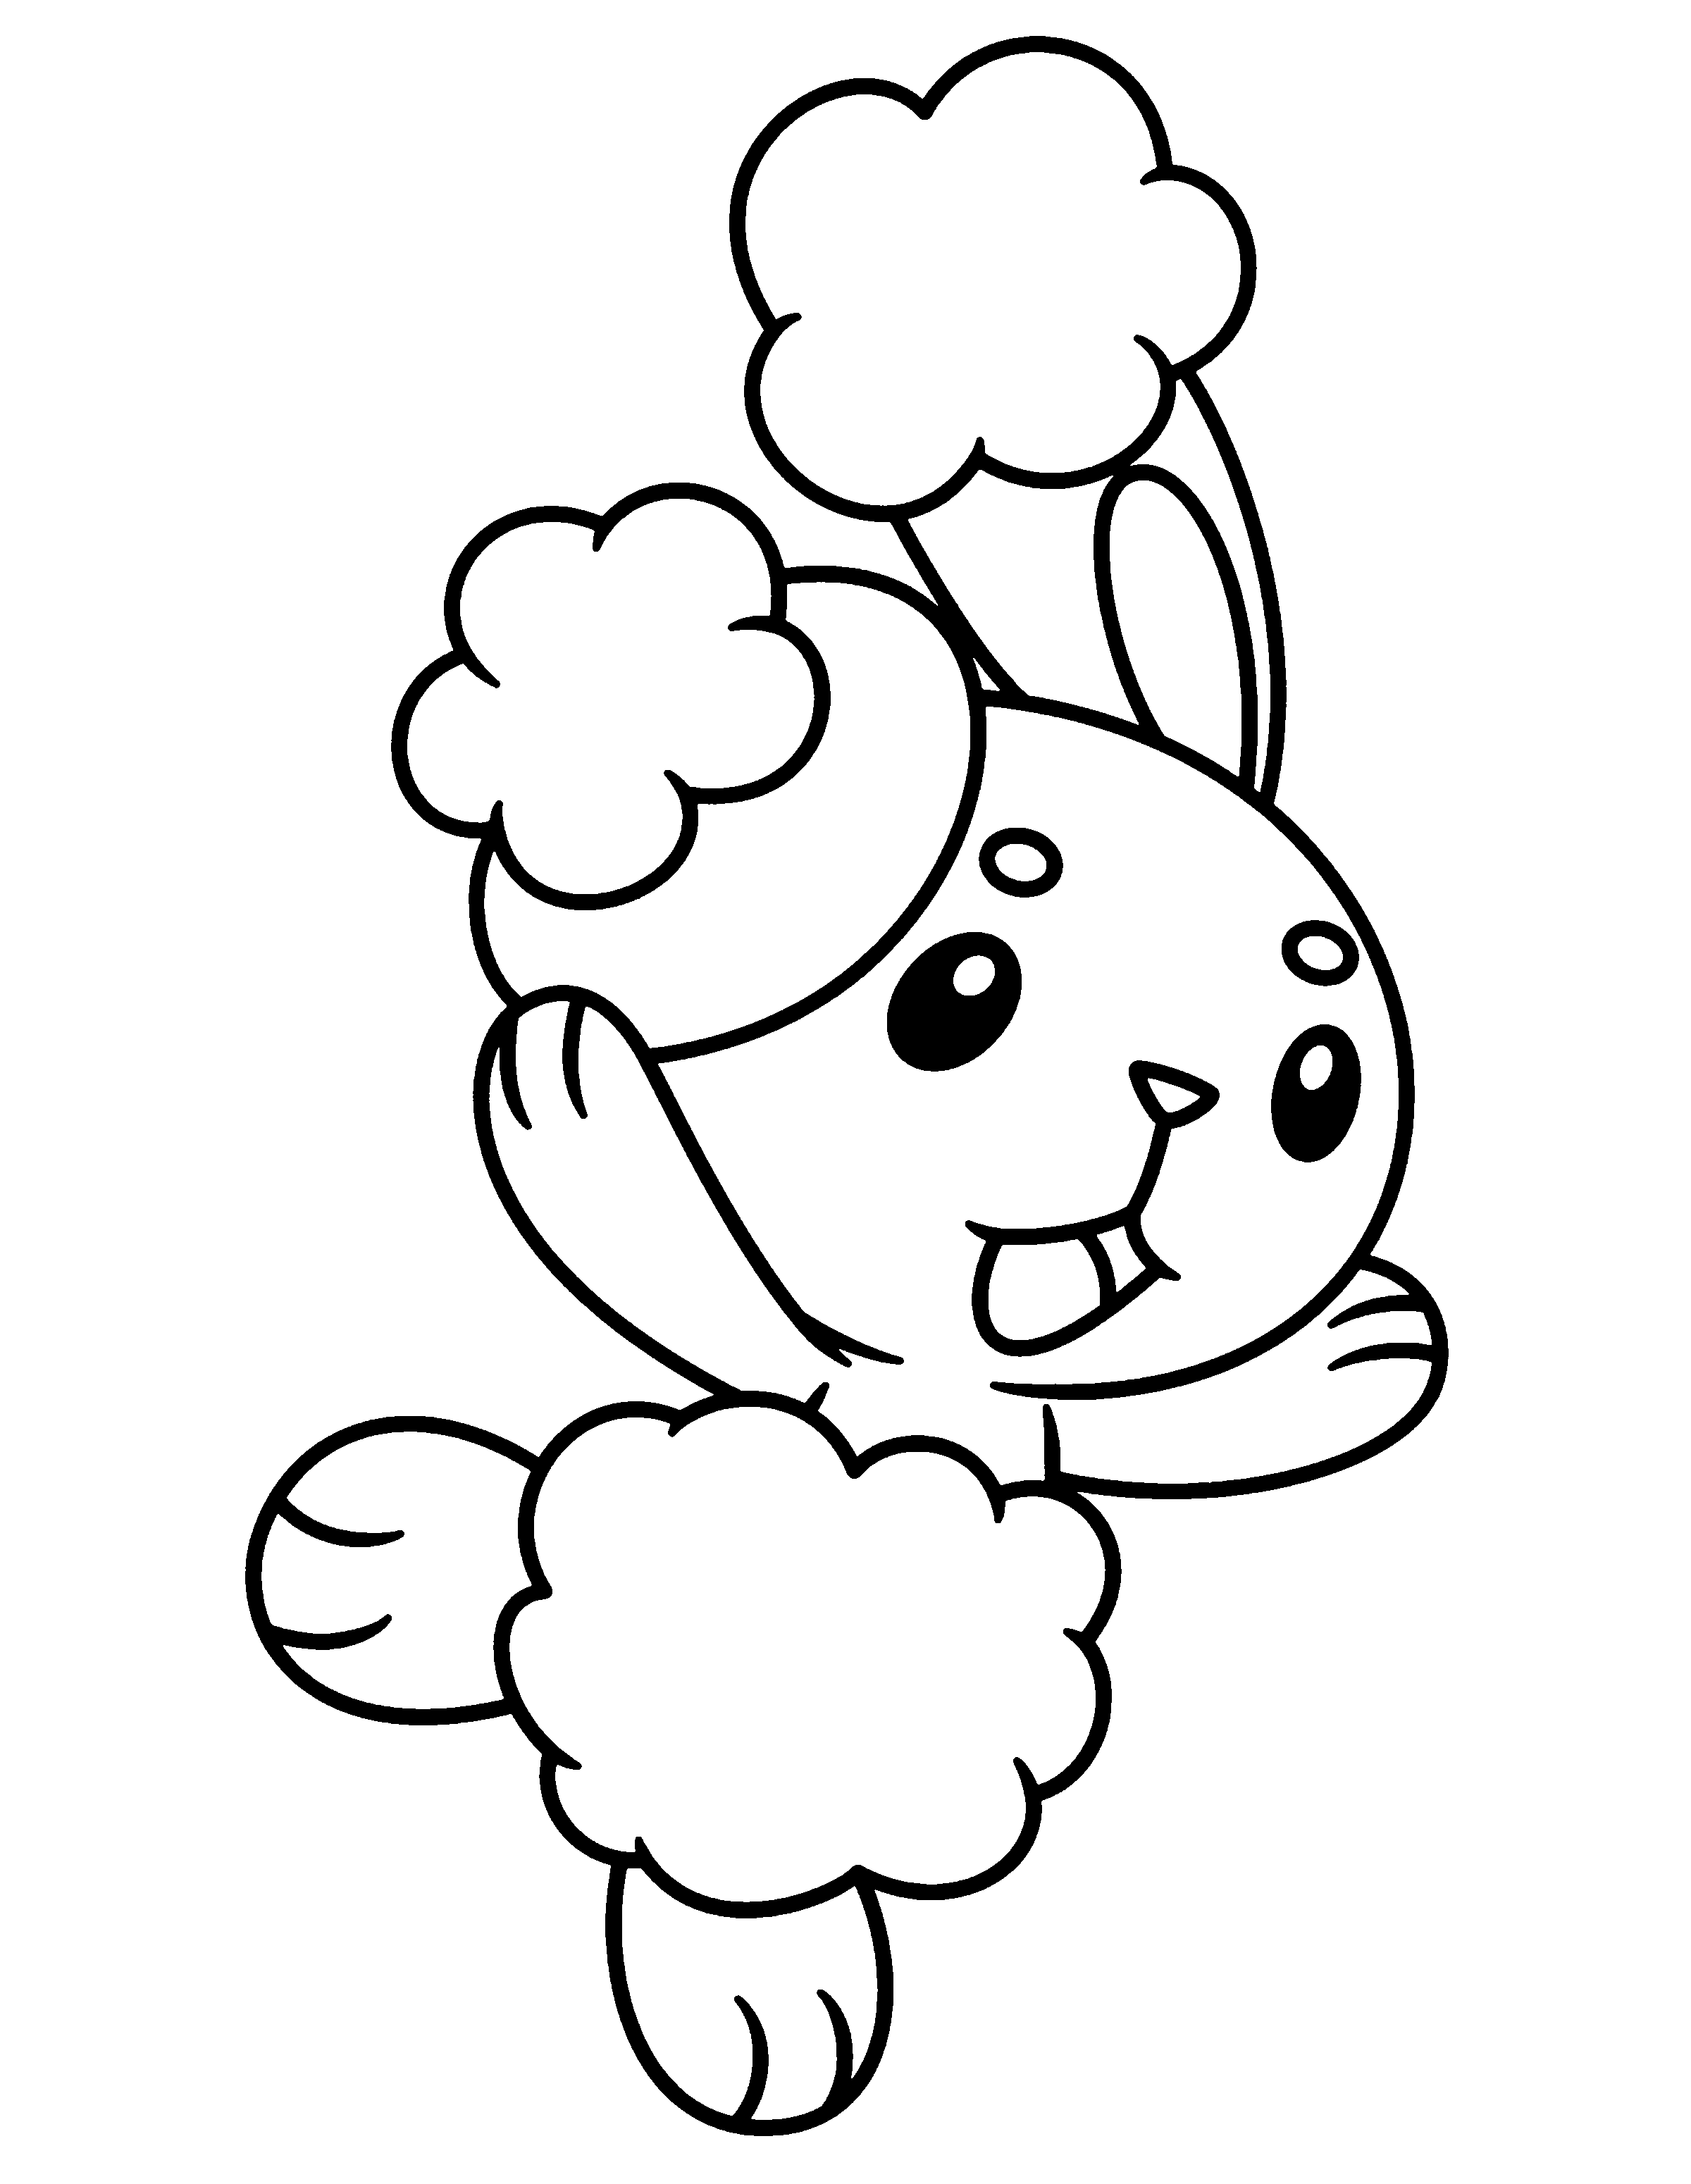 Pokemon Black And White Coloring Printouts - Coloring Pages for ...